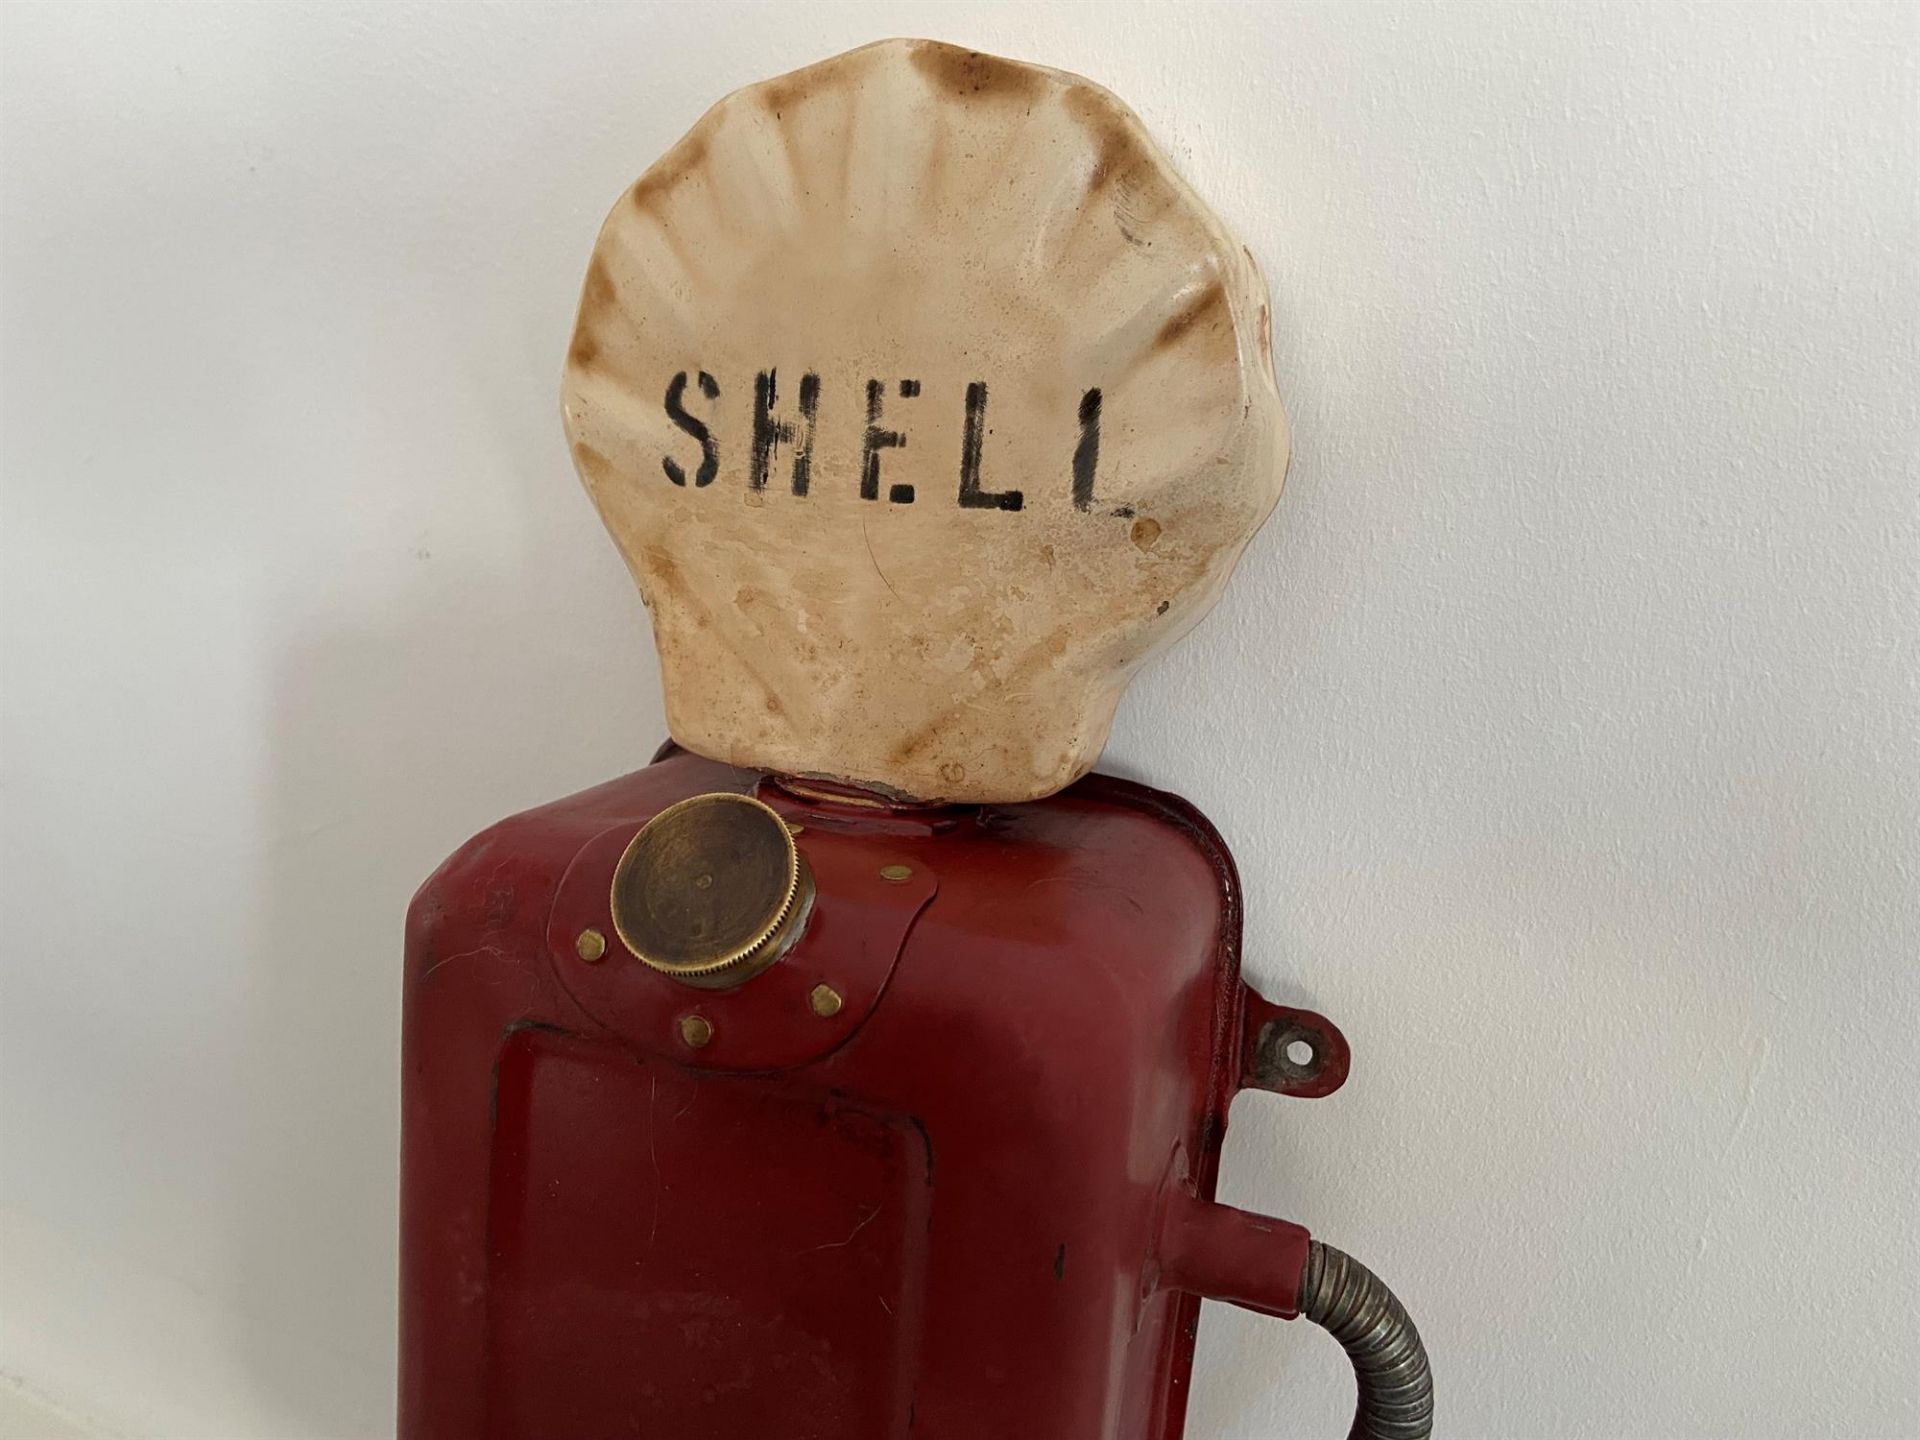 A Novelty Oil/Fuel Container Marked "Shell" - Image 2 of 4